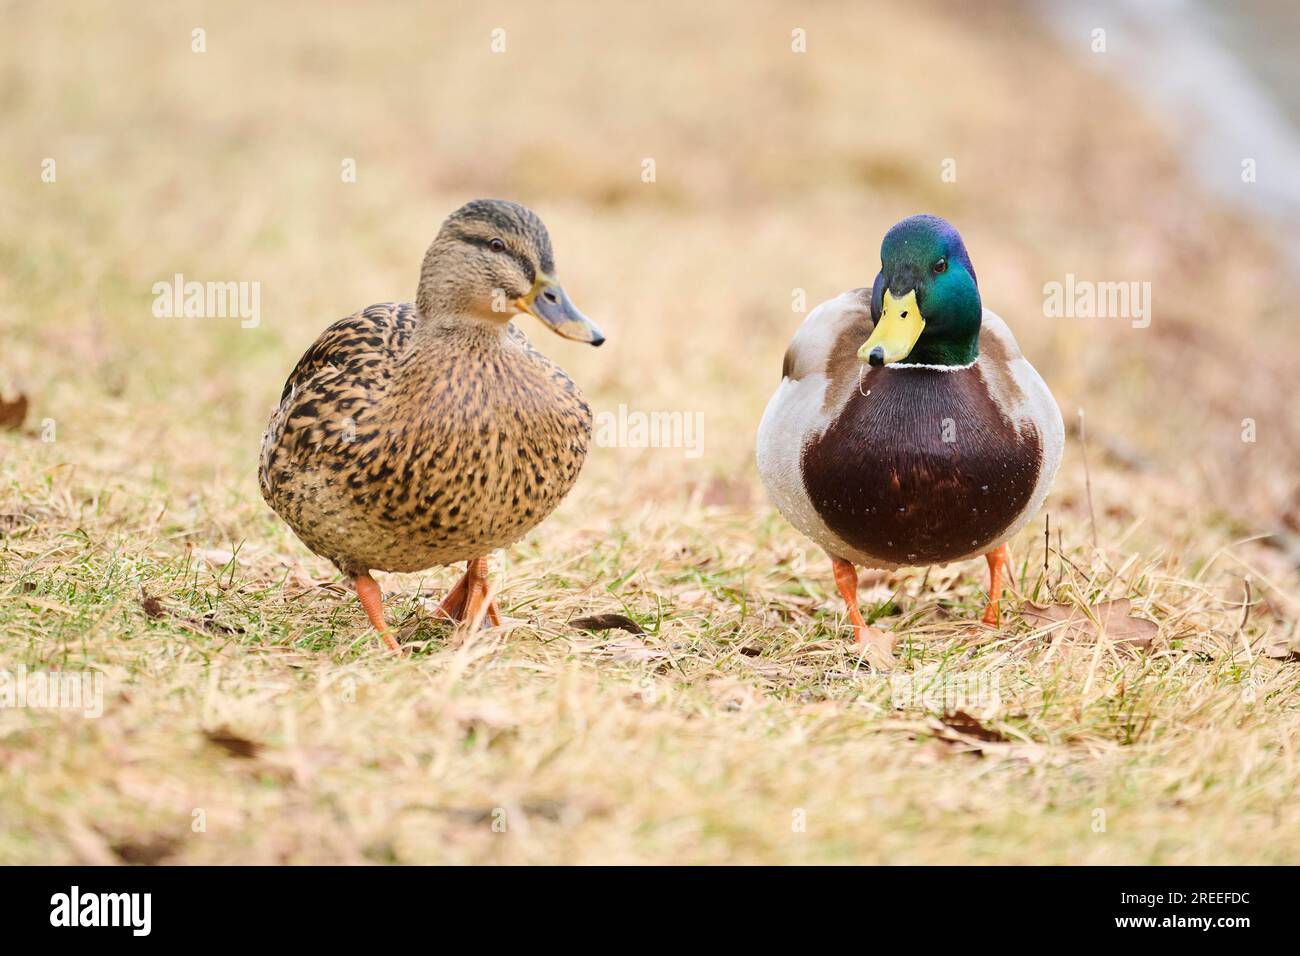 Wild duck (Anas platyrhynchos) couple standing on a meadow, Bavaria, Germany Europe Stock Photo